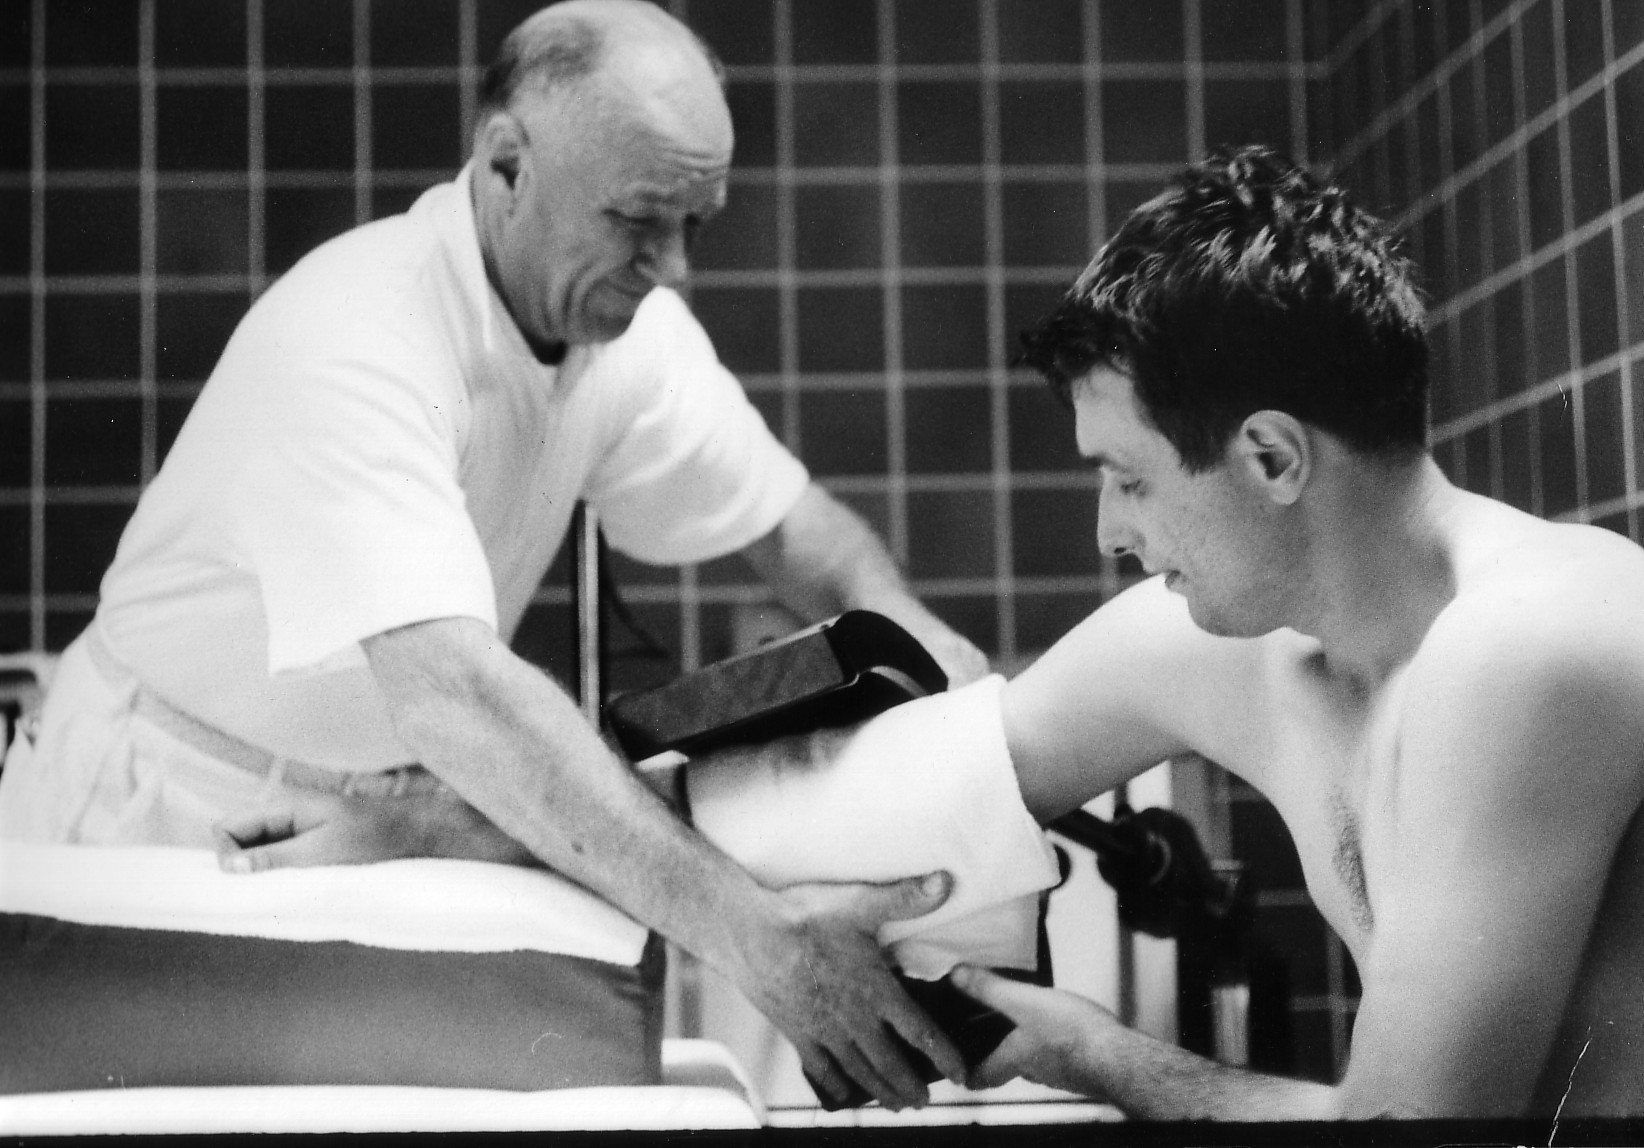 Dad getting his some treatment after a game in 1964